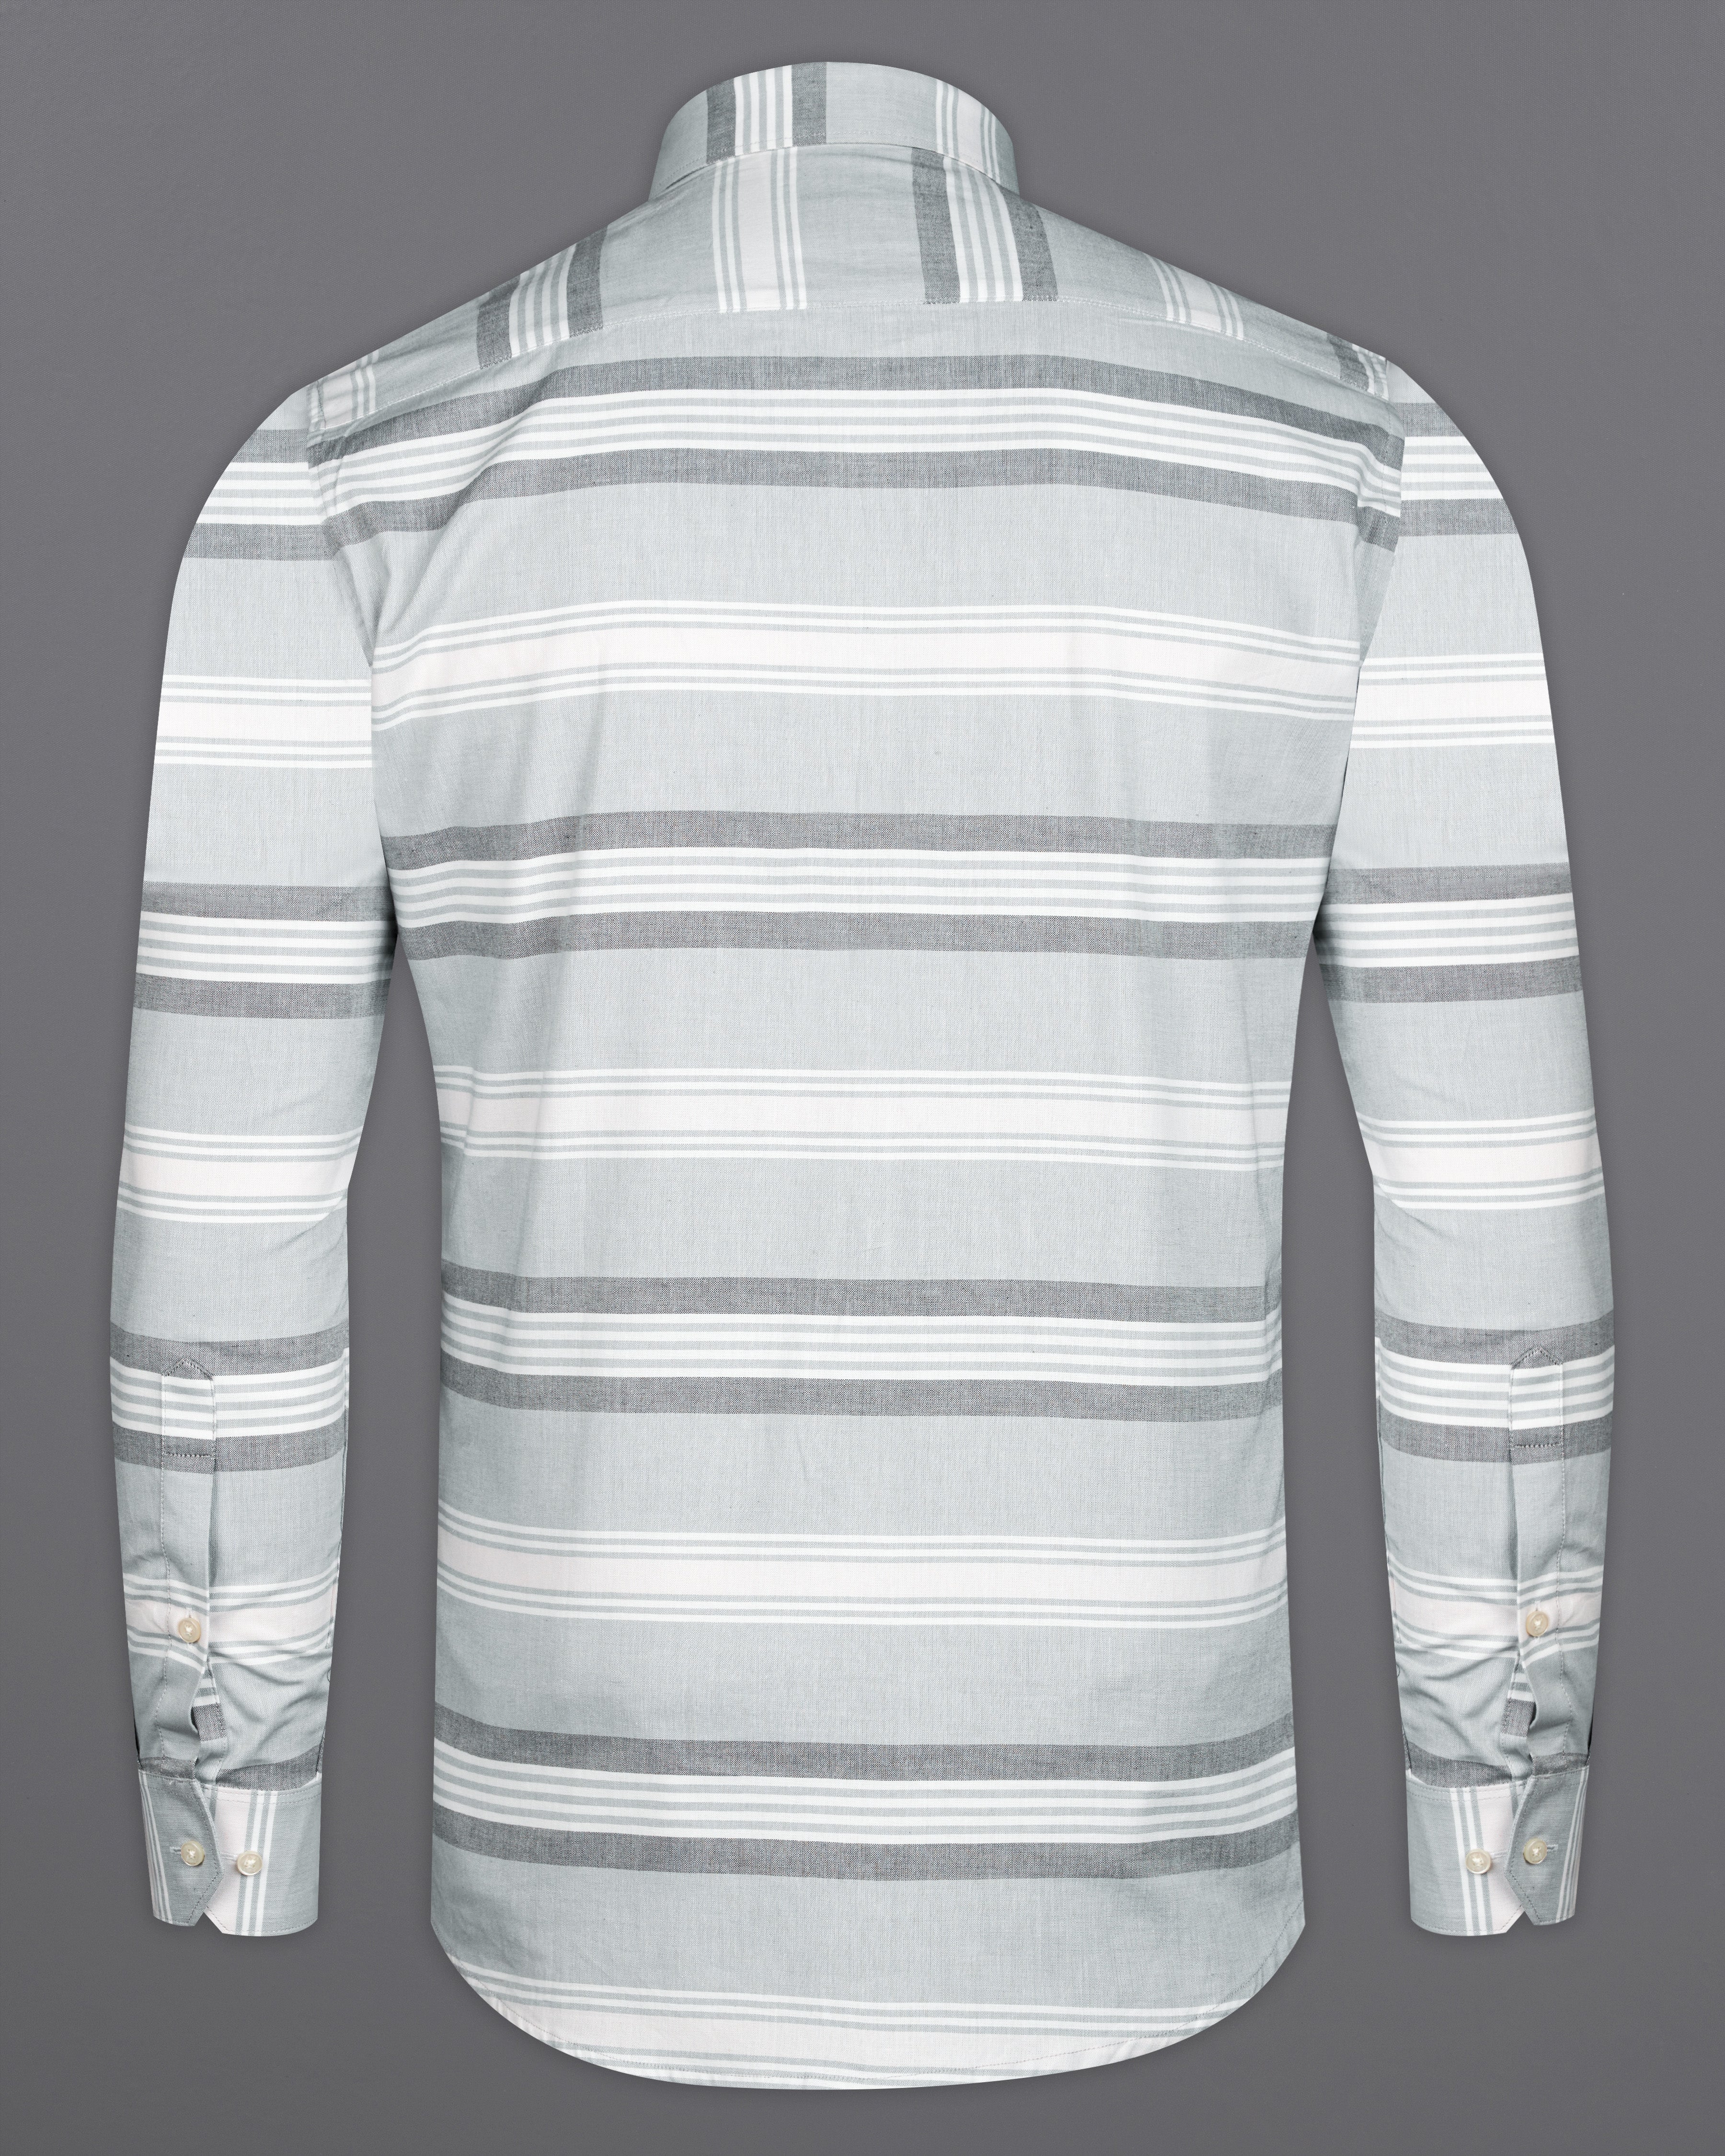 Geyser Gray and White Striped Royal Oxford Shirt 9974-BD-38, 9974-BD-H-38, 9974-BD-39, 9974-BD-H-39, 9974-BD-40, 9974-BD-H-40, 9974-BD-42, 9974-BD-H-42, 9974-BD-44, 9974-BD-H-44, 9974-BD-46, 9974-BD-H-46, 9974-BD-48, 9974-BD-H-48, 9974-BD-50, 9974-BD-H-50, 9974-BD-52, 9974-BD-H-52